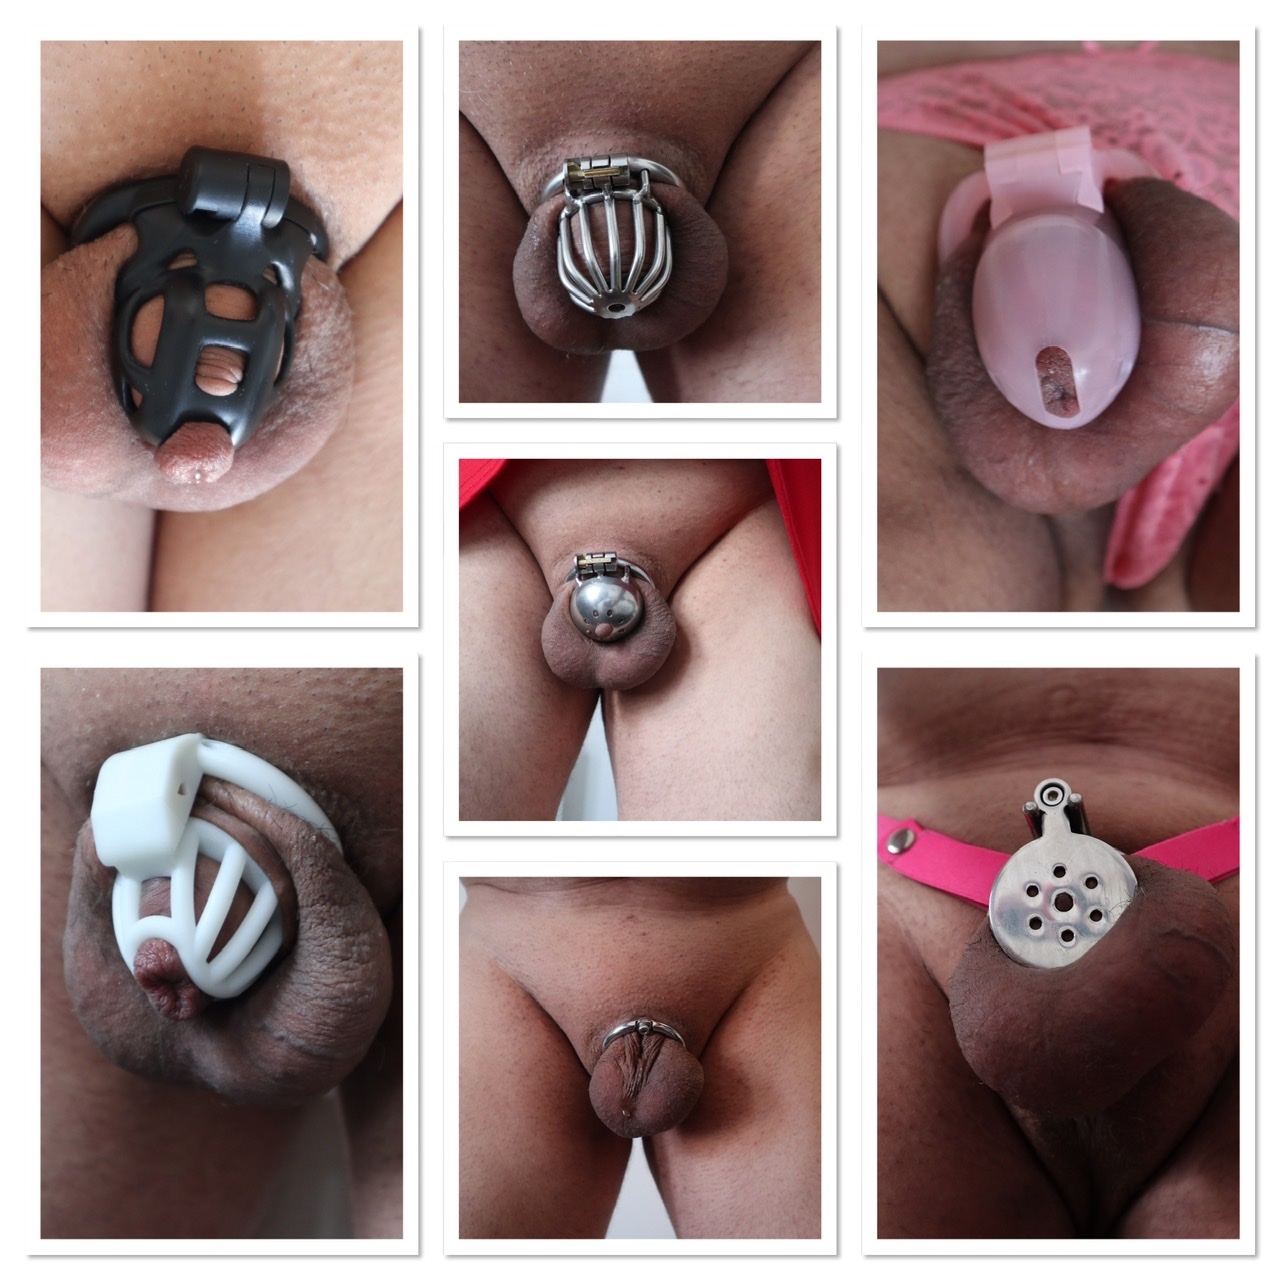 Collection of smallish chastity cages